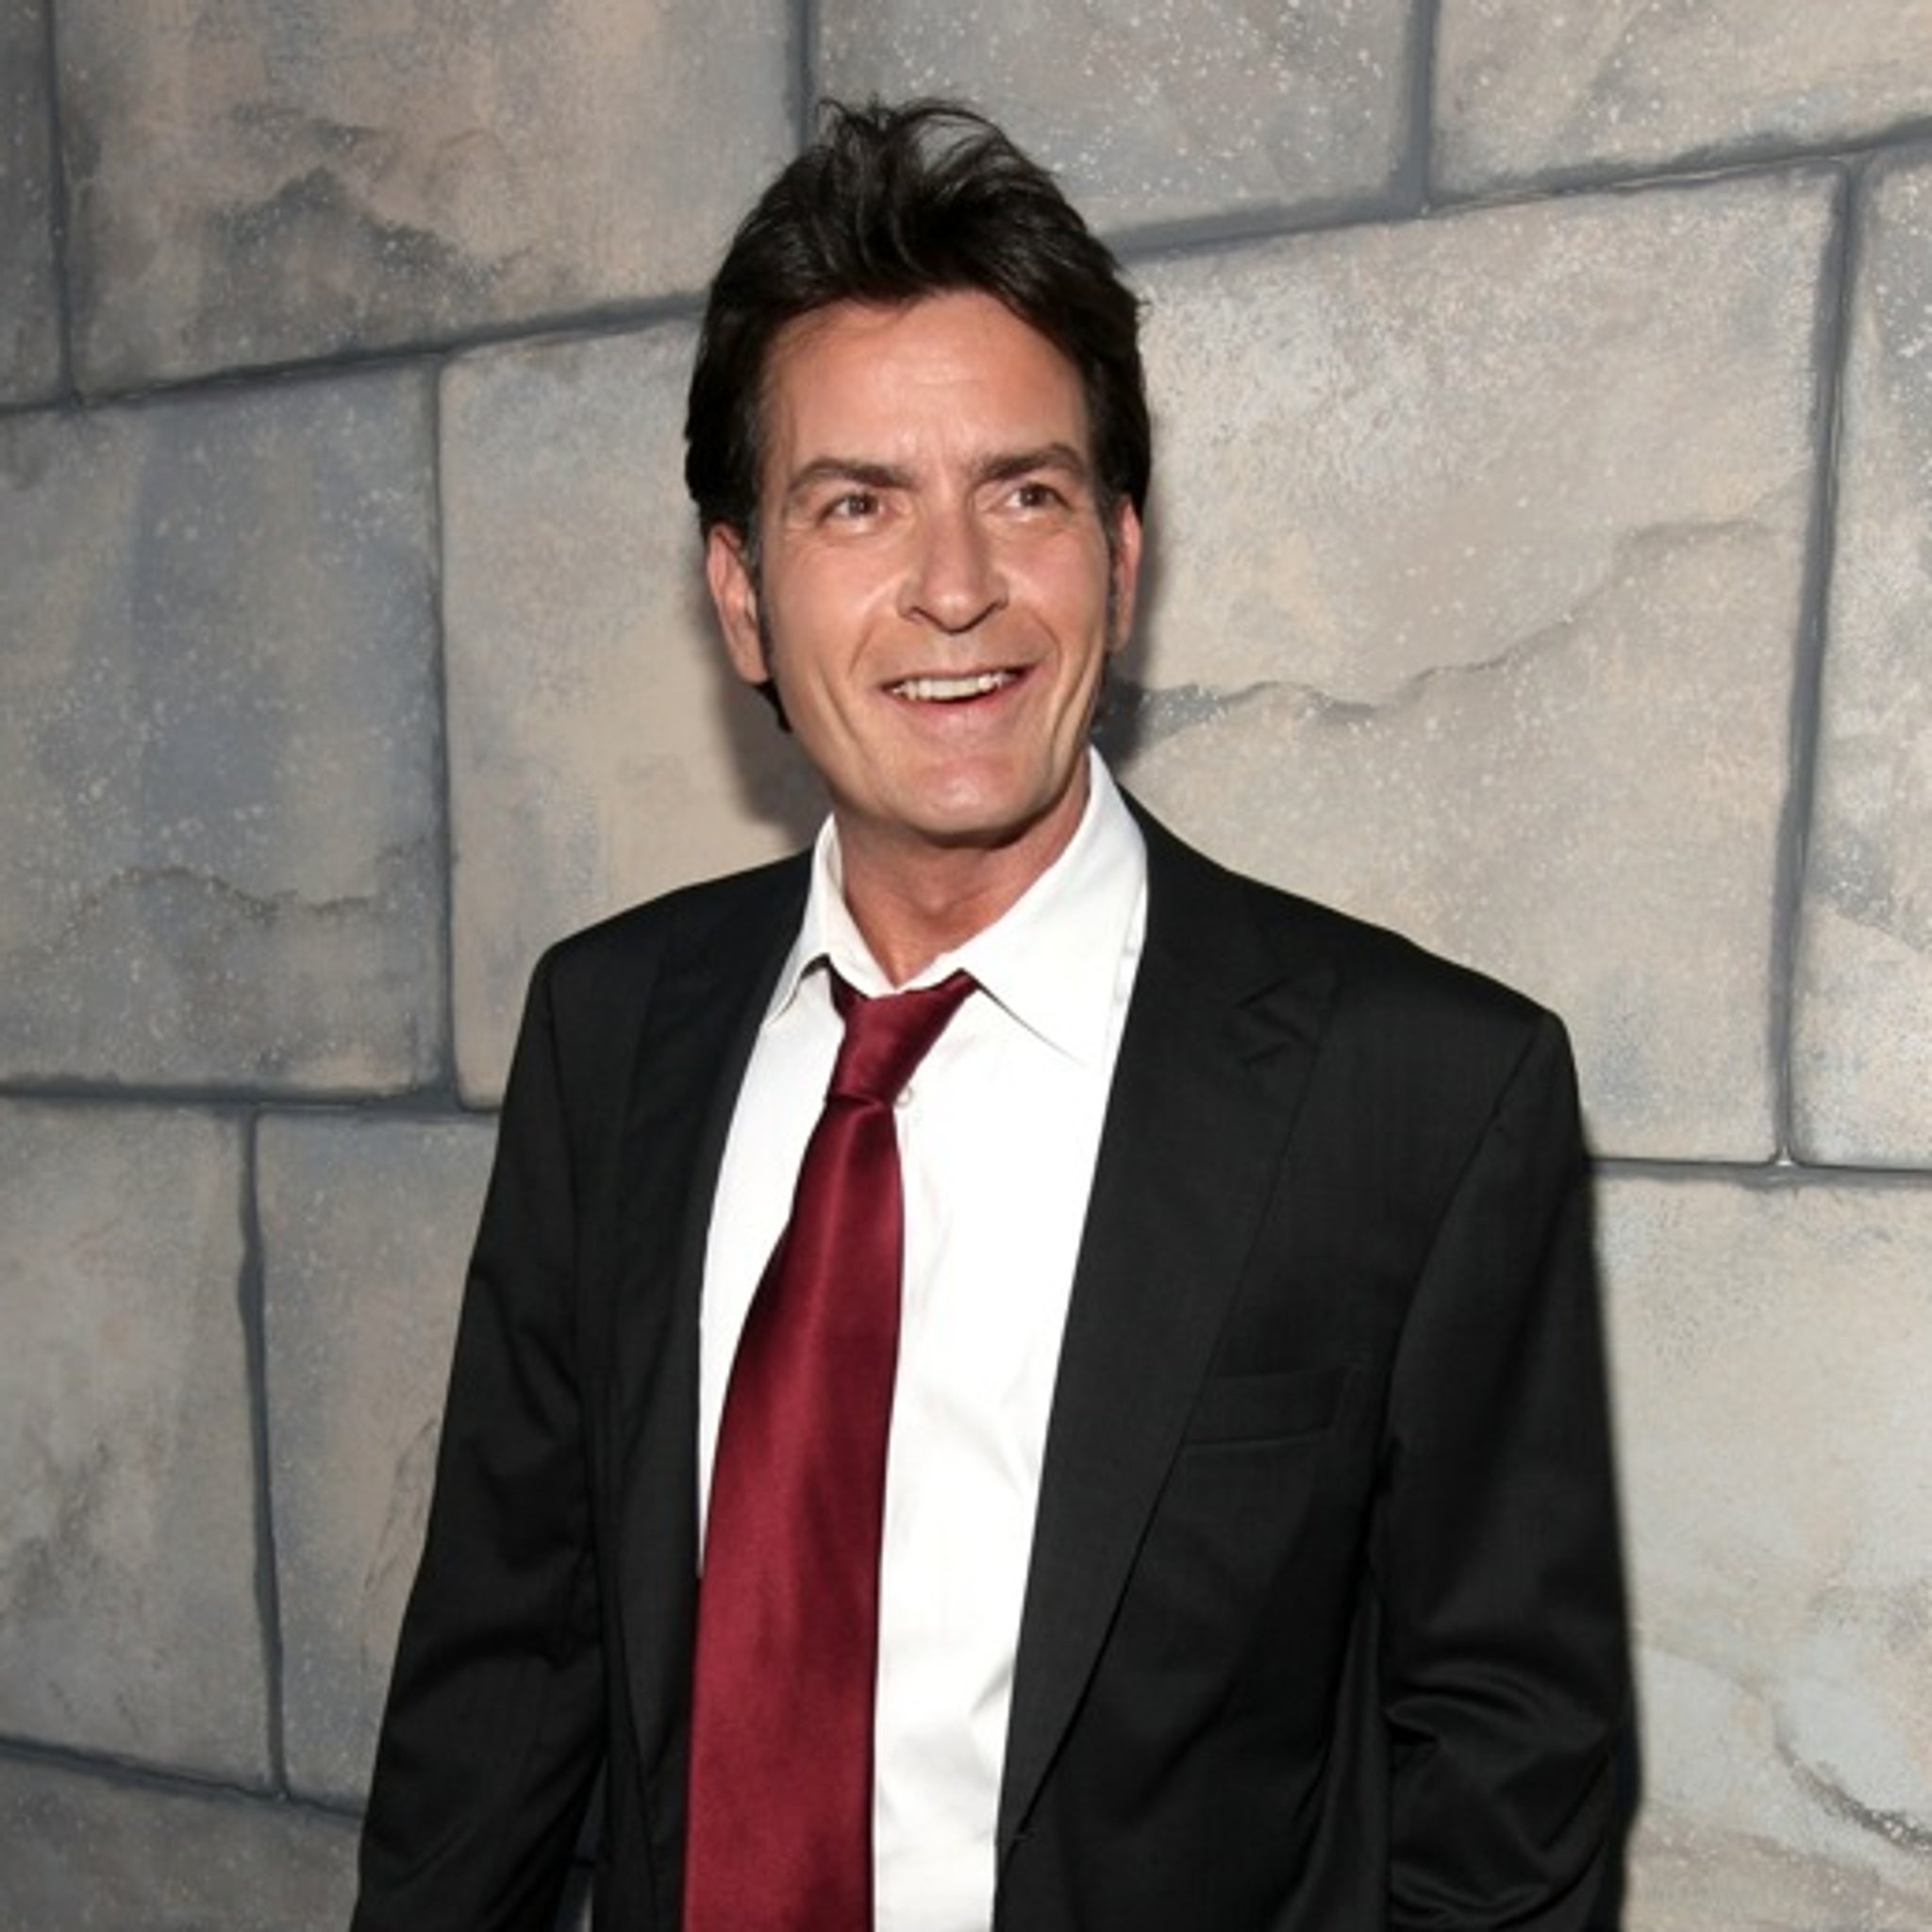 Charlie Sheen through the years